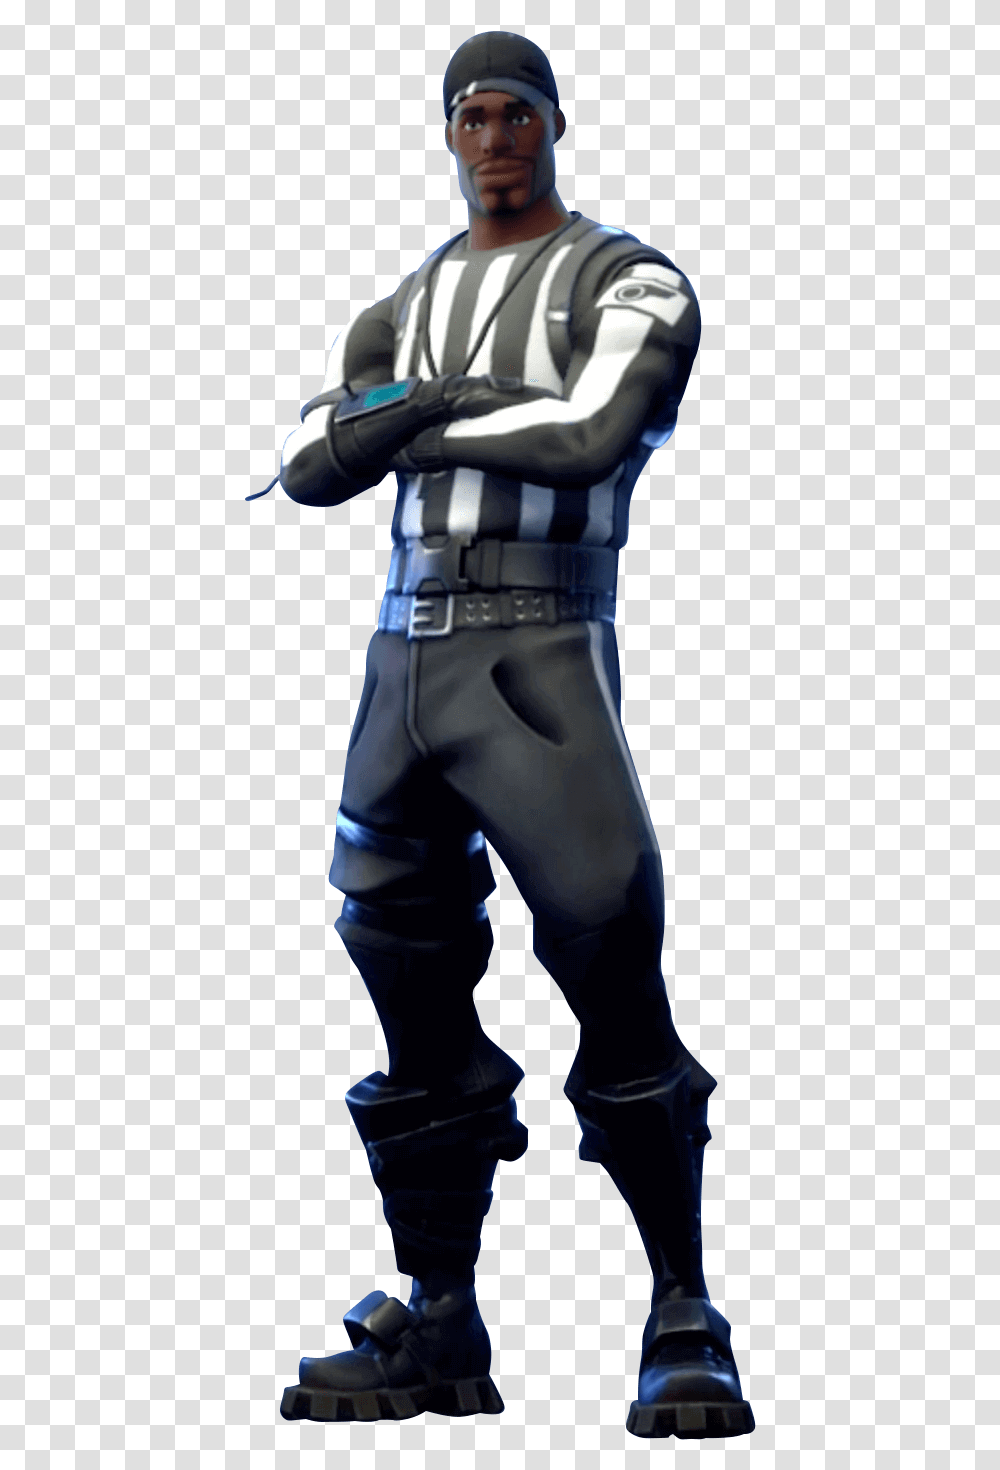 Striped Soldier Skin Fortnite 800 V Buck, Person, Military Uniform, People Transparent Png